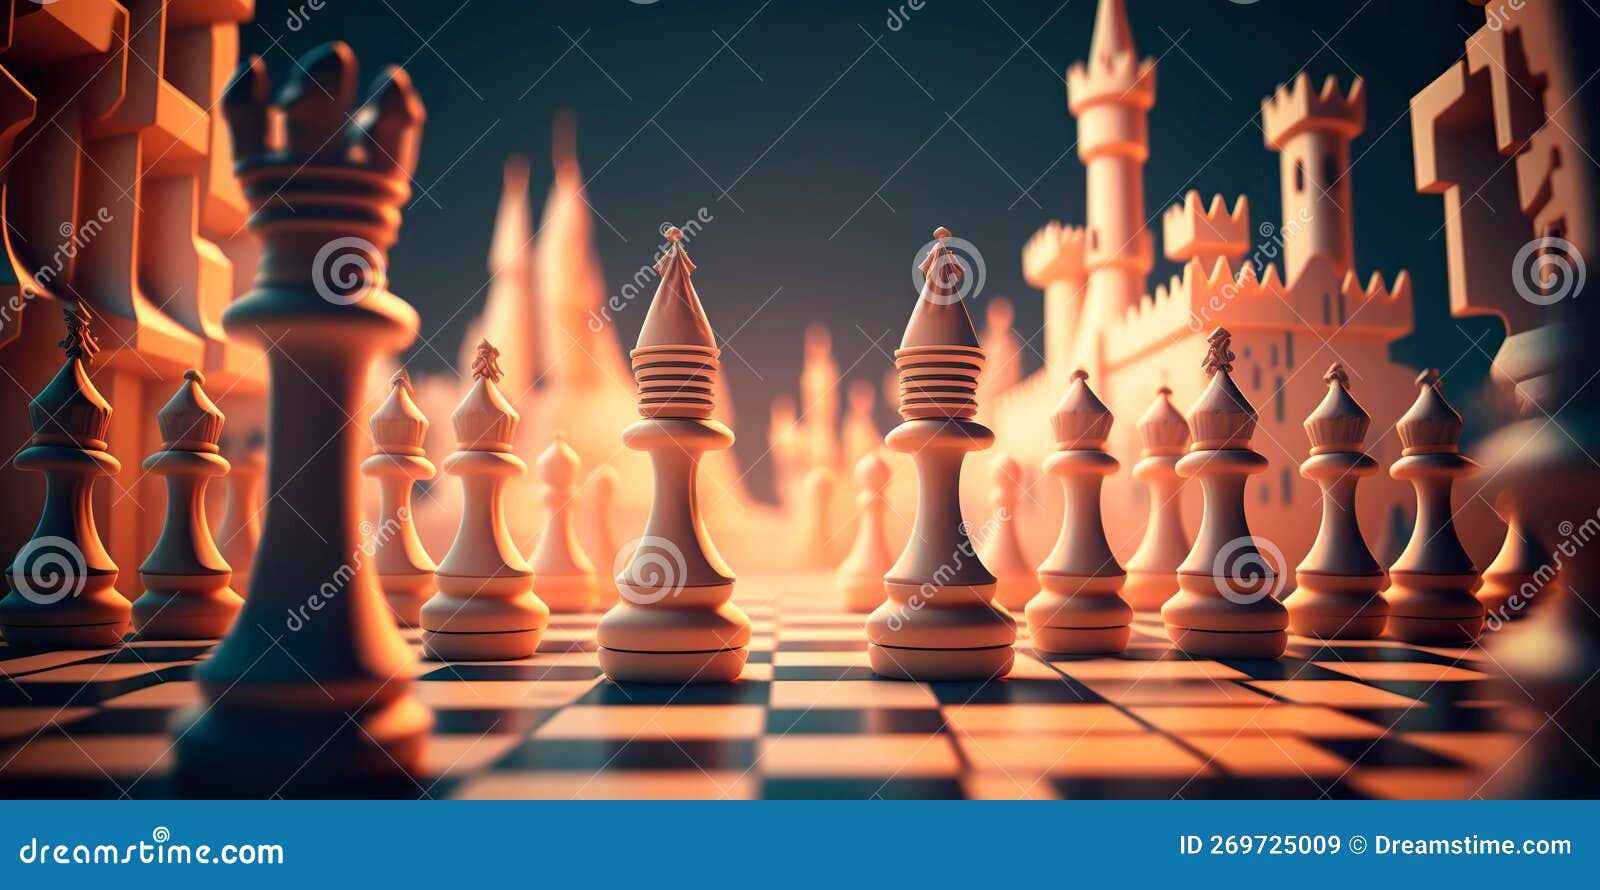 Leadership Concept The King Chess Piece With Chess Others Nearby From  Floating Board Game Concept Of Business Ideas And Competition And Strategy  Plan Success Meaning Stock Photo - Download Image Now - iStock